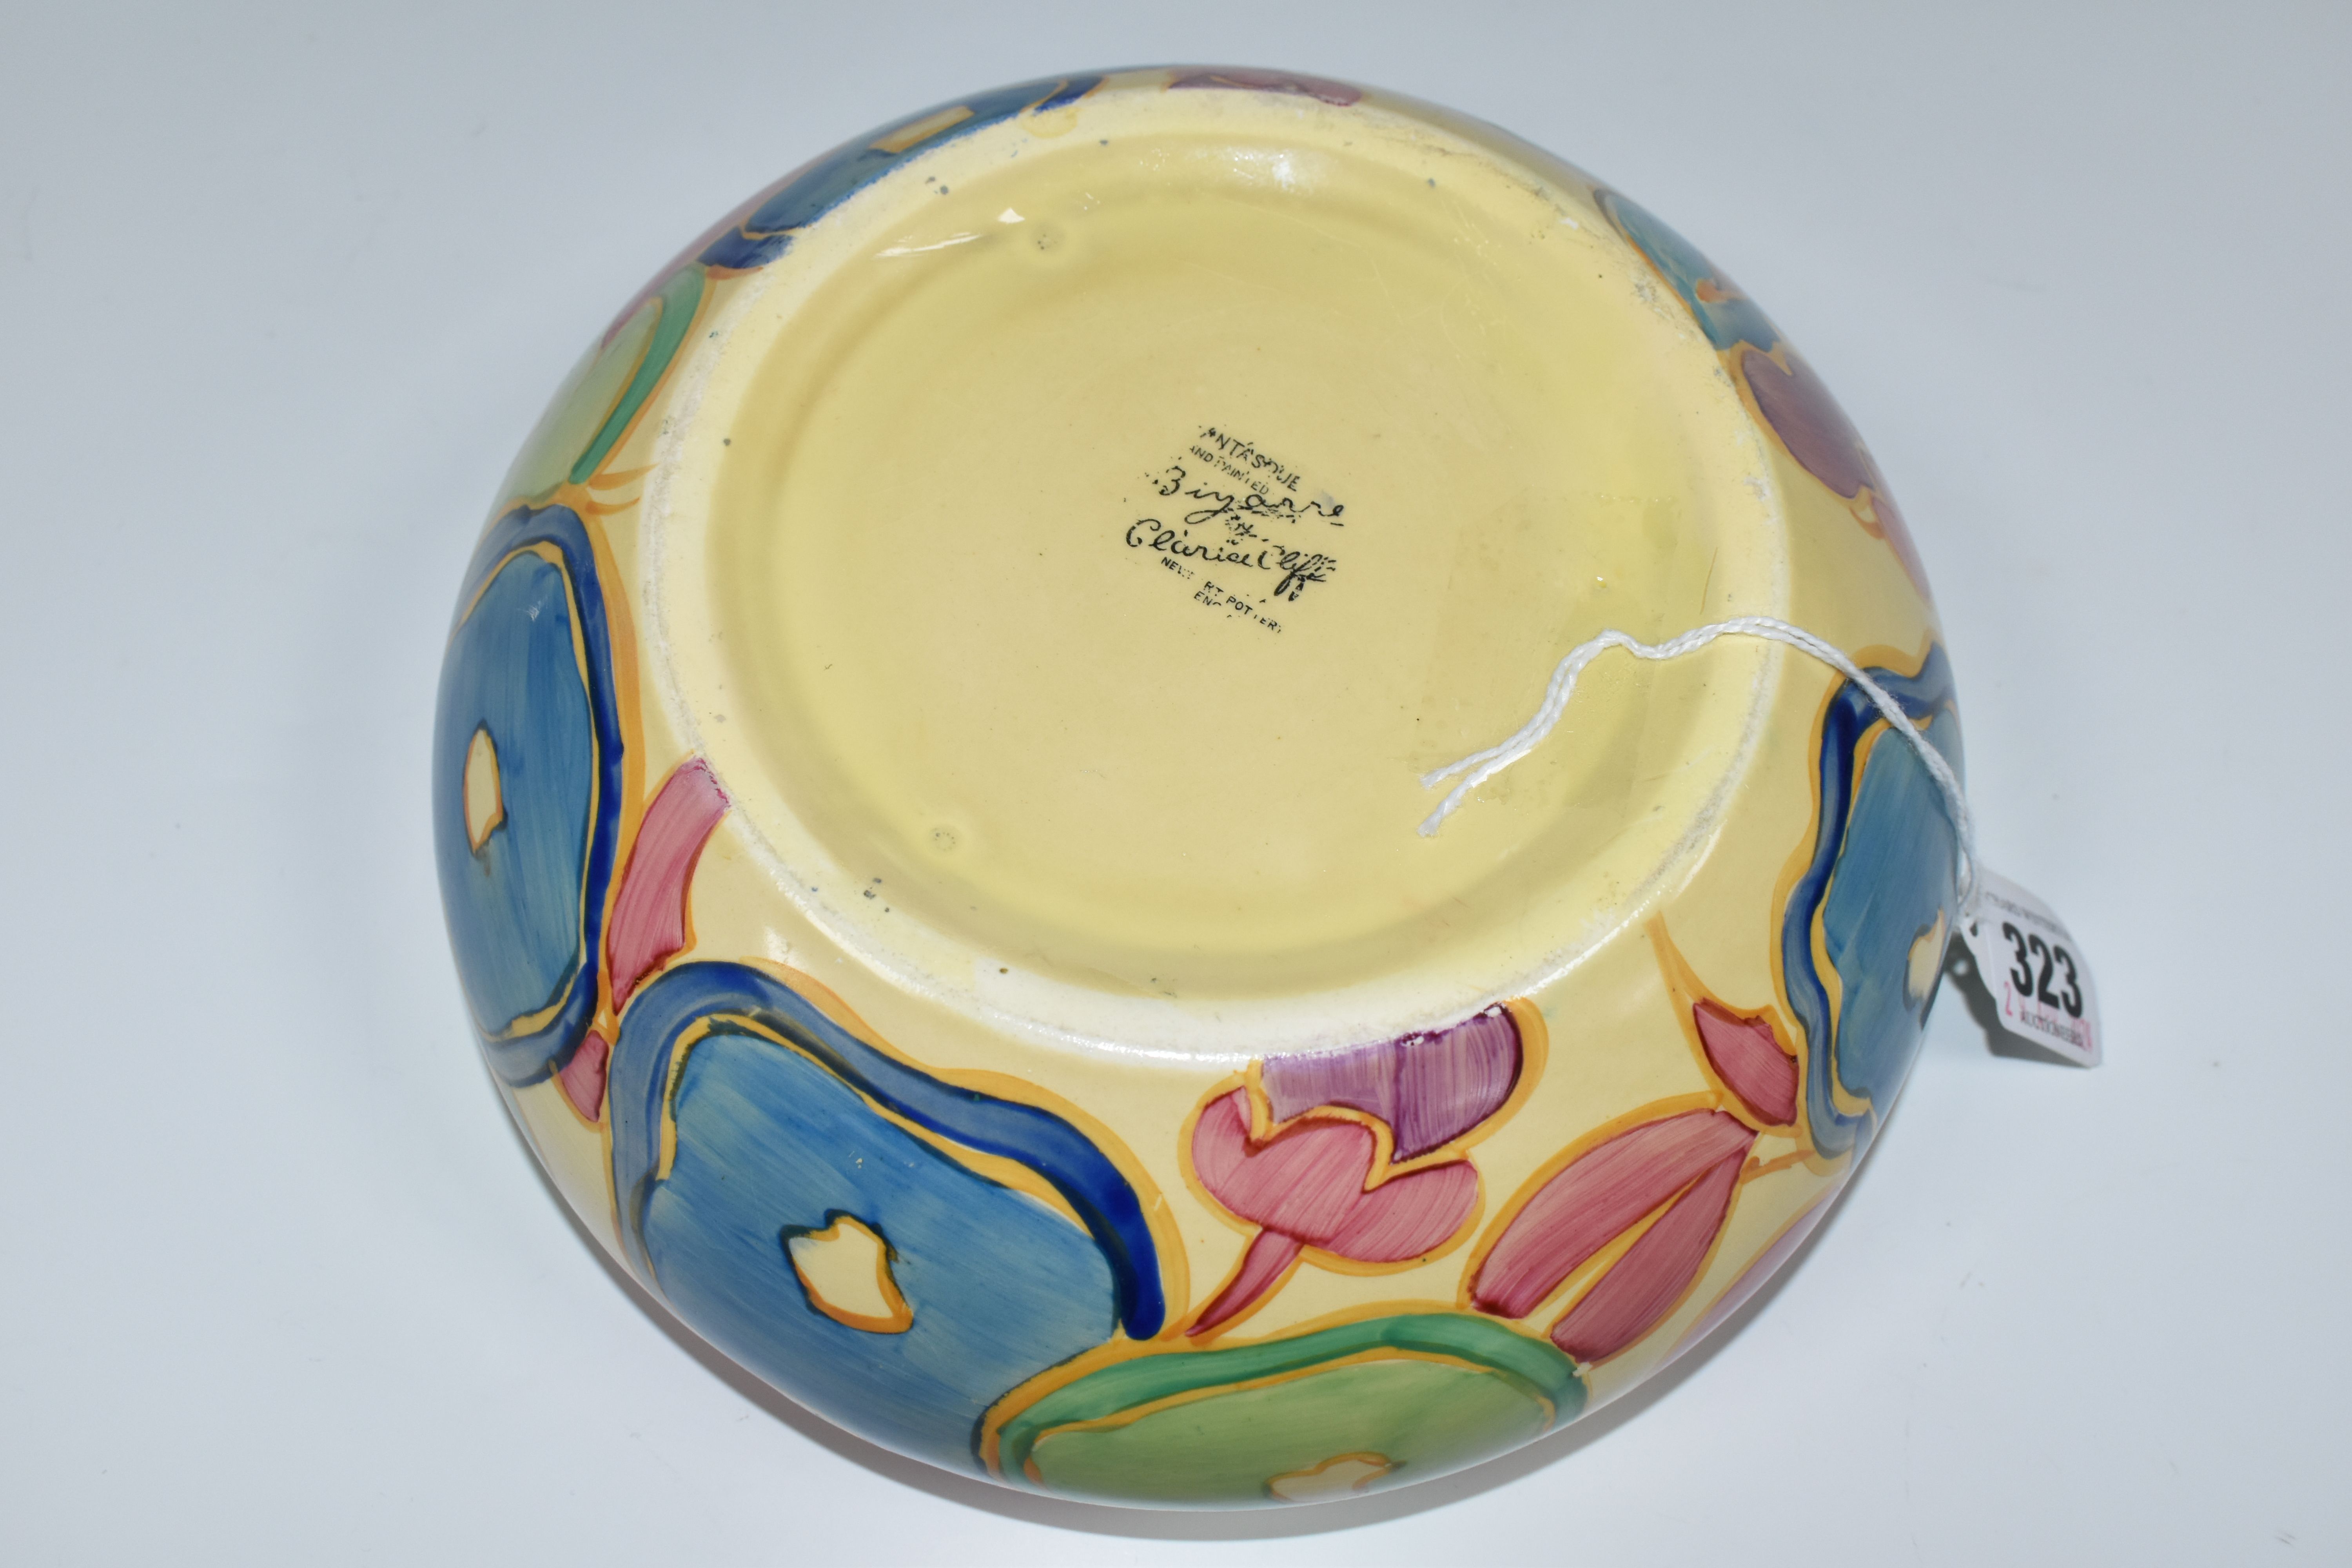 A CLARICE CLIFF FANTASQUE BIZARRE BOWL, in Blue Chintz pattern, painted with blue, pink and green - Image 5 of 5